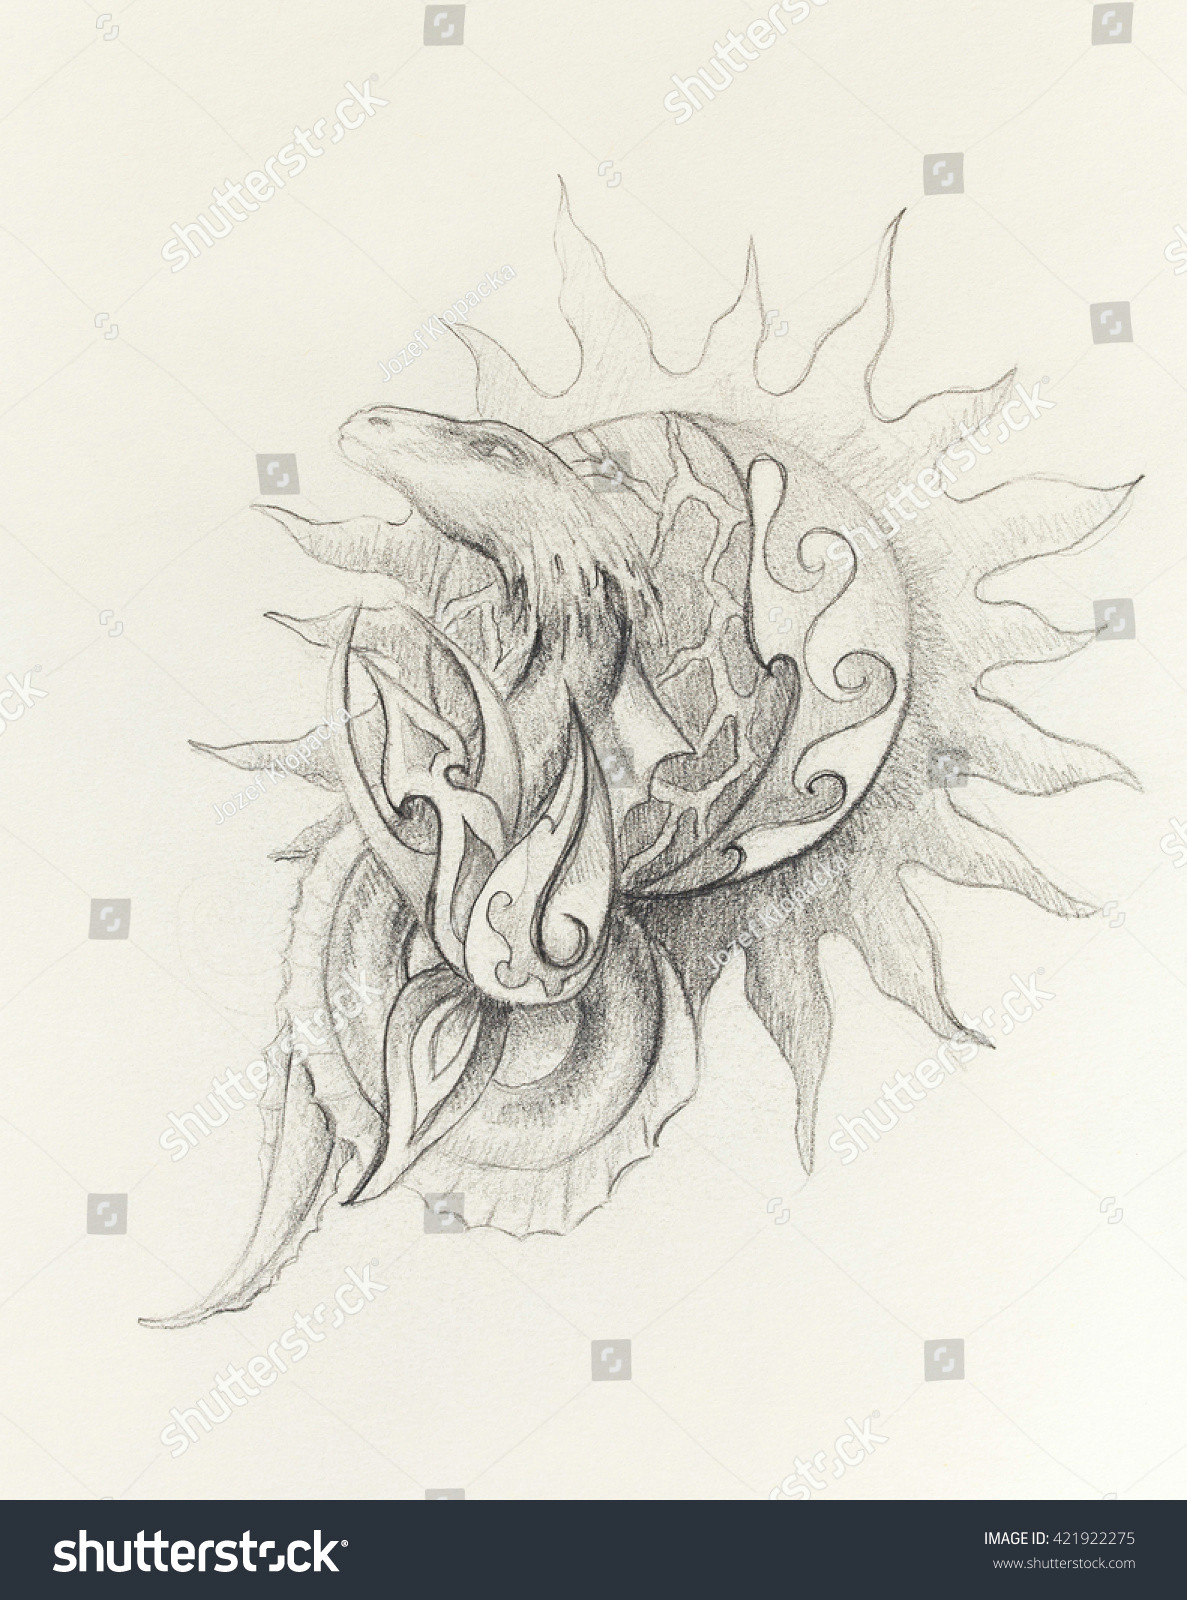 Oldest Drawings Of Dragons Drawing ornamental Dragon Sun On Old Stock Illustration Royalty